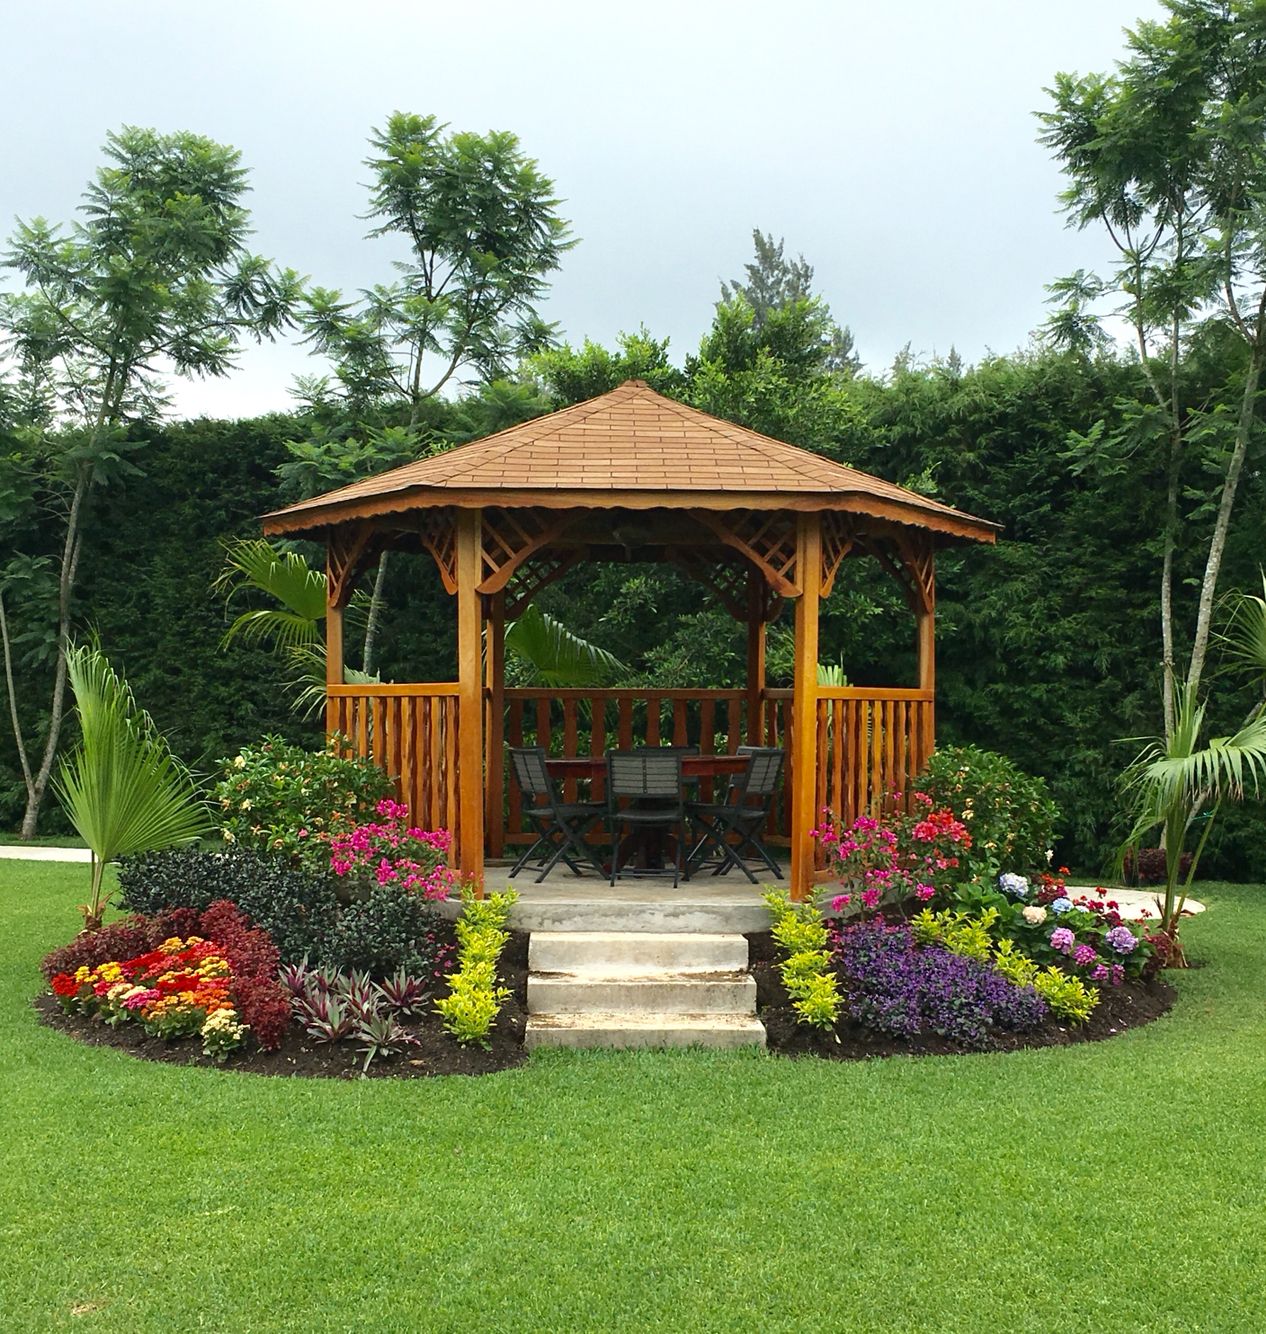 The Timeless Beauty of Wooden Gazebos